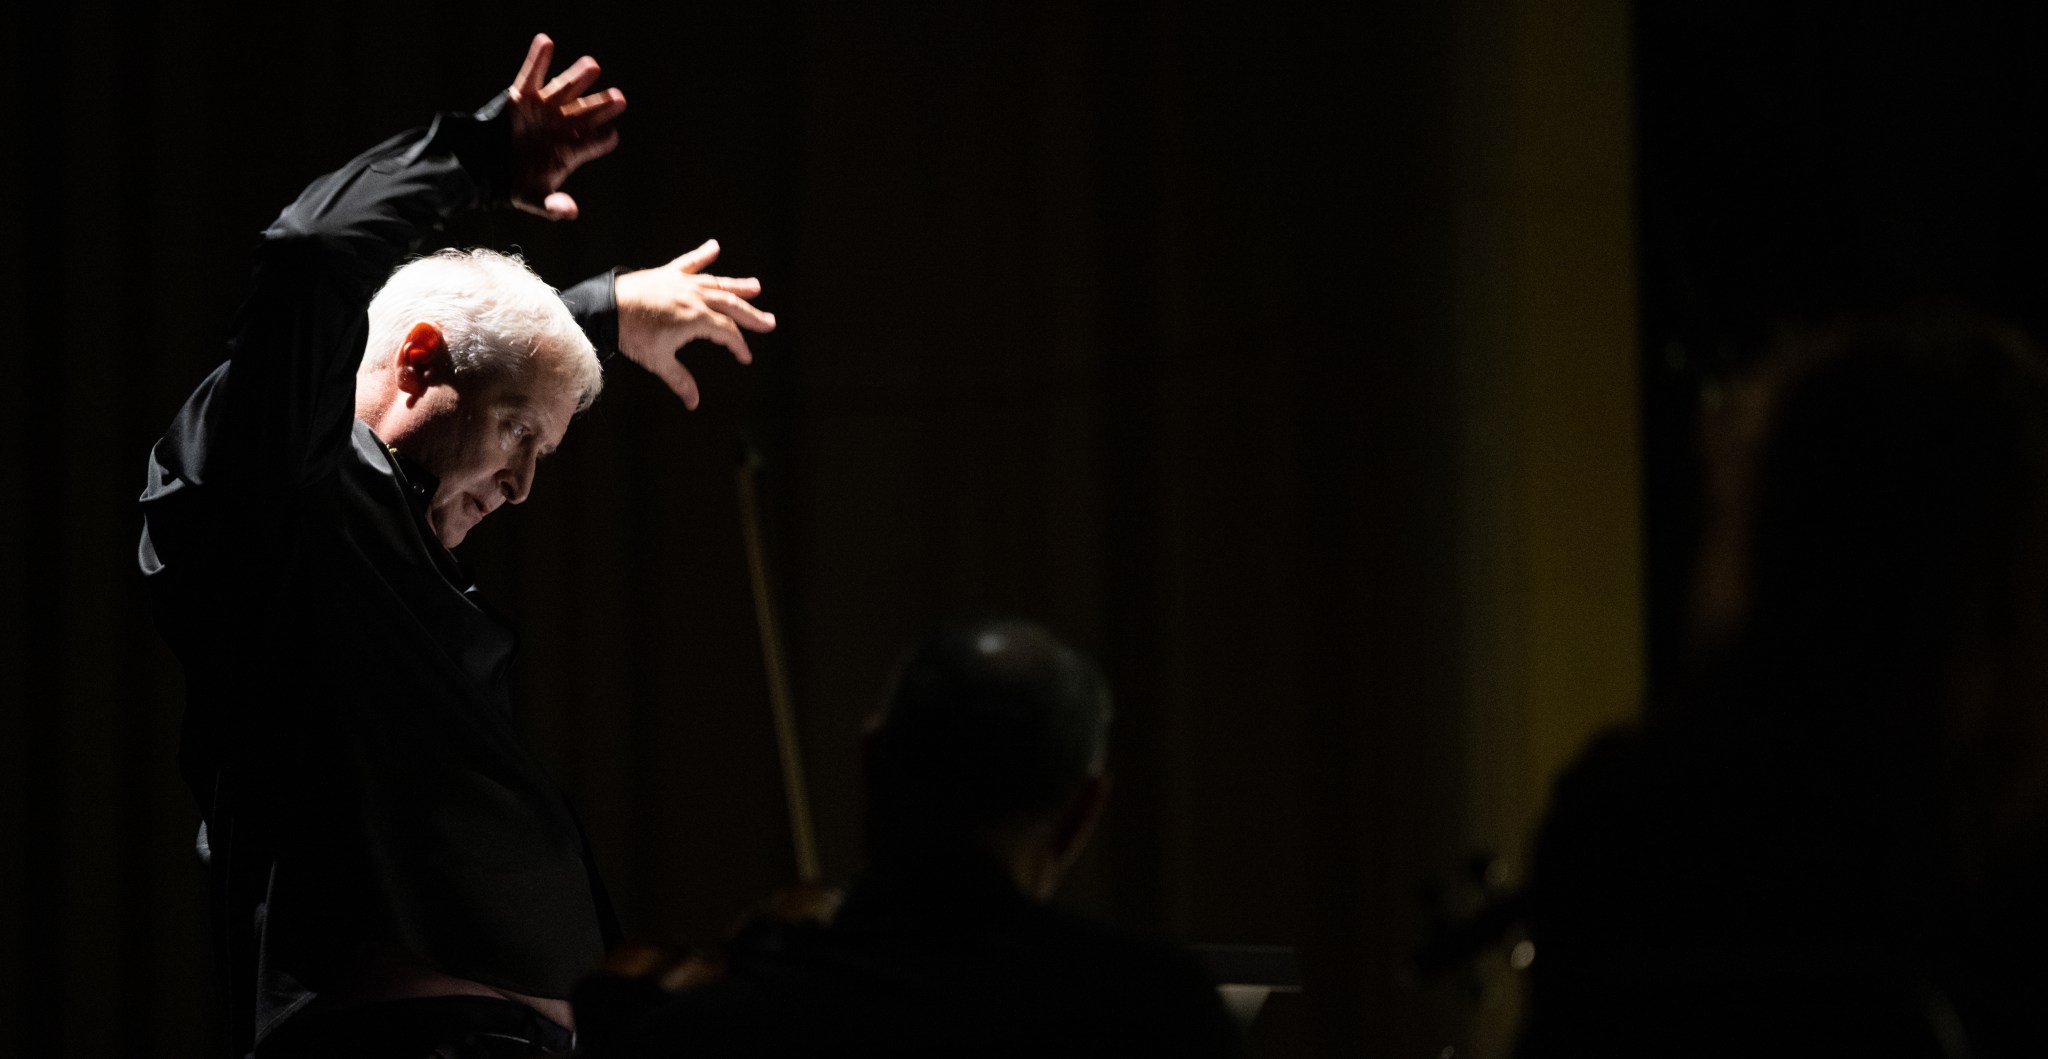 Against a black background, a man with white hair waves his hands as he conducts an orchestra, off screen. He is looking downward toward a podium and his hands are blurred in motion, fingers spread wide.